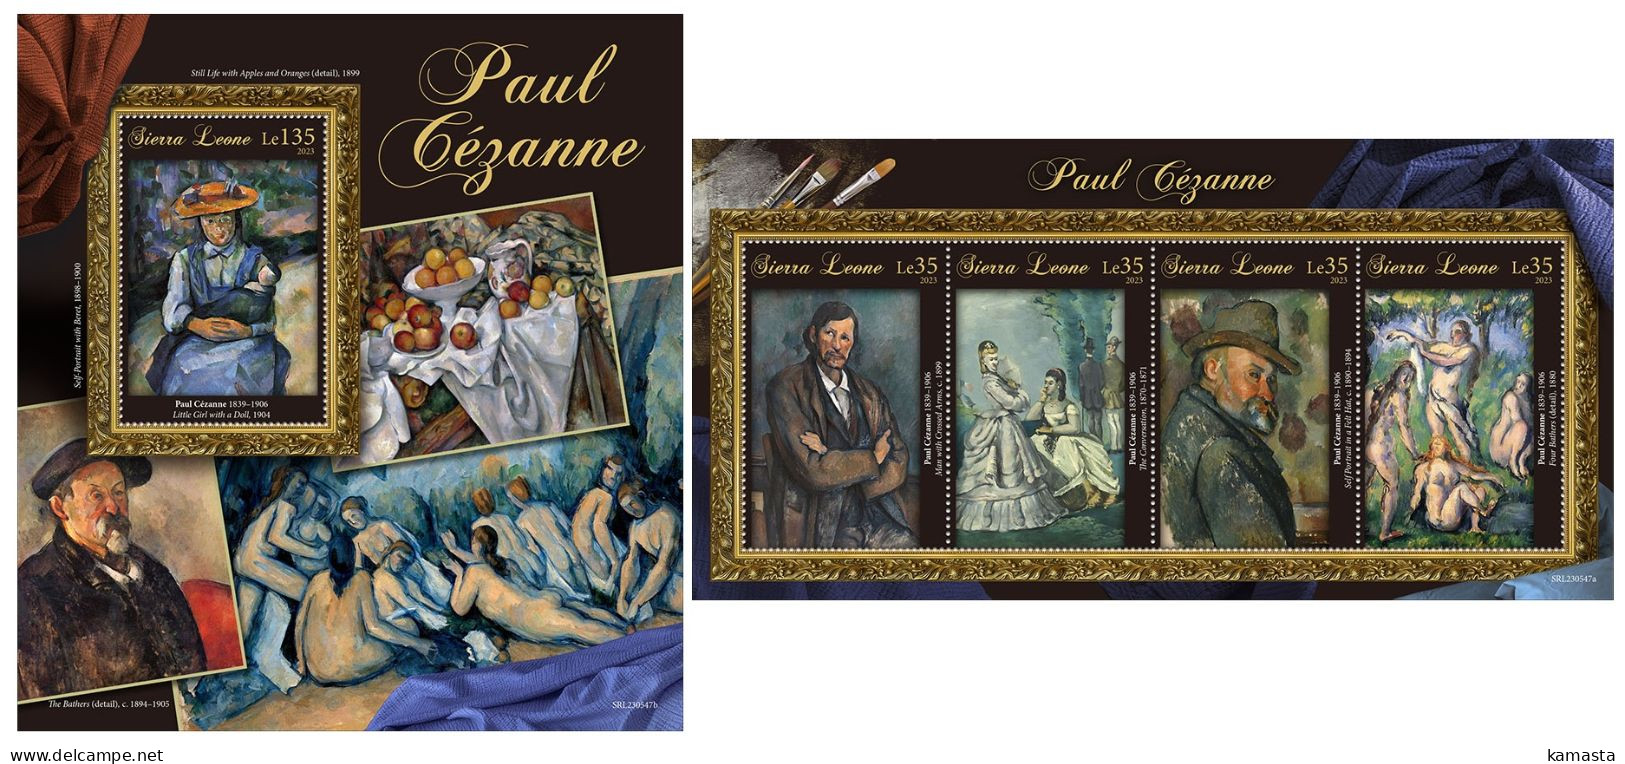 Sierra Leone 2023 Paul Cézanne. (547) OFFICIAL ISSUE - Impressionismo